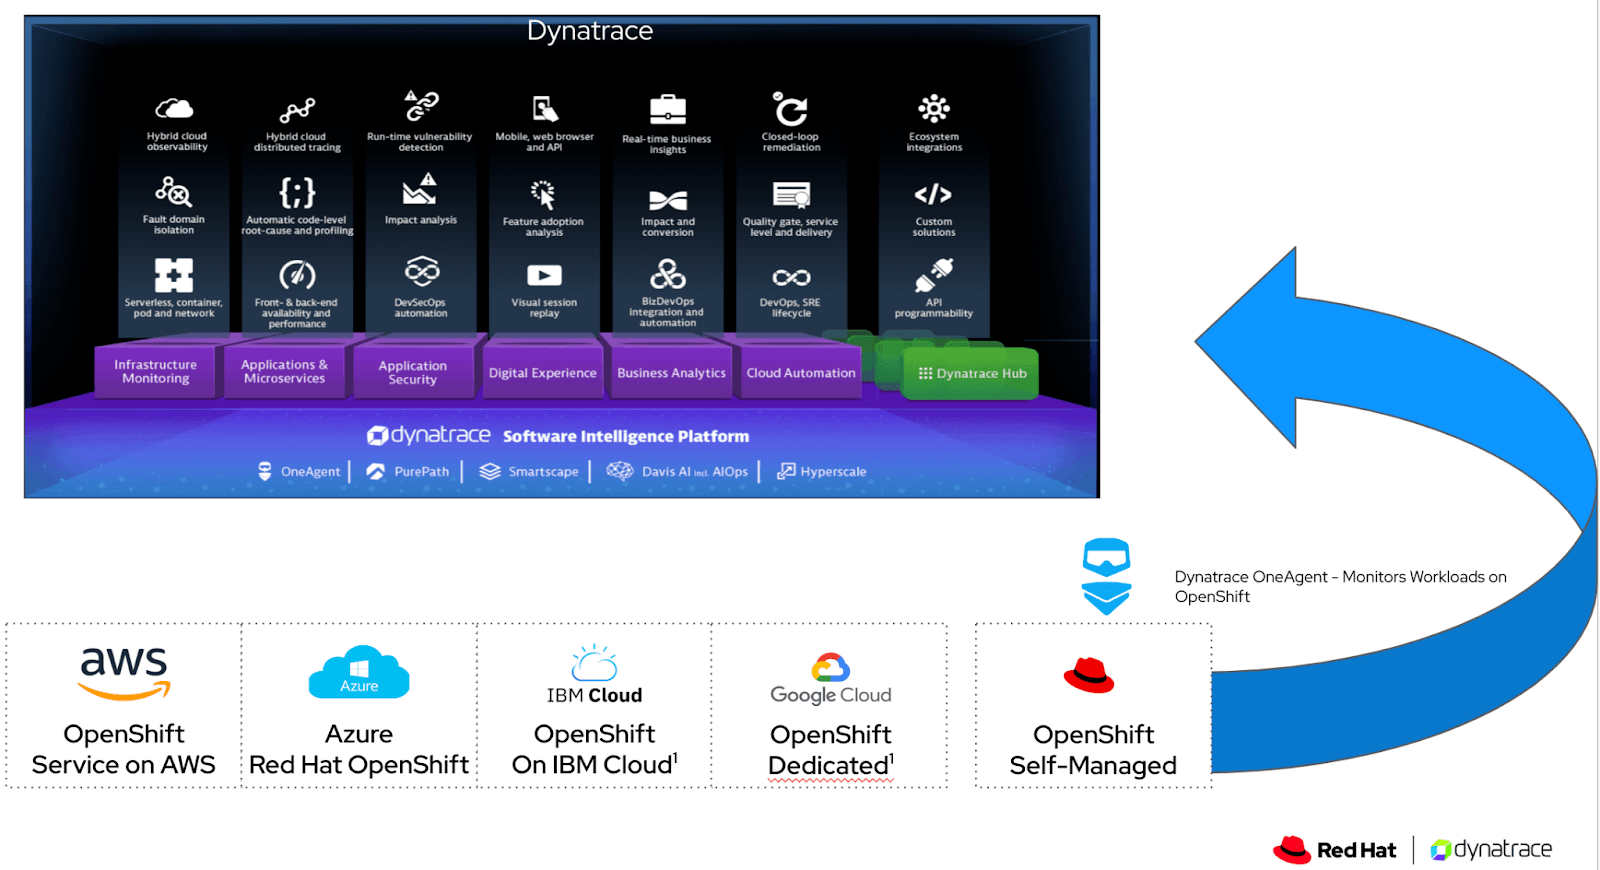 Dynatrace observability is now available for Red Hat OpenShift on the IBM® Power® architecture